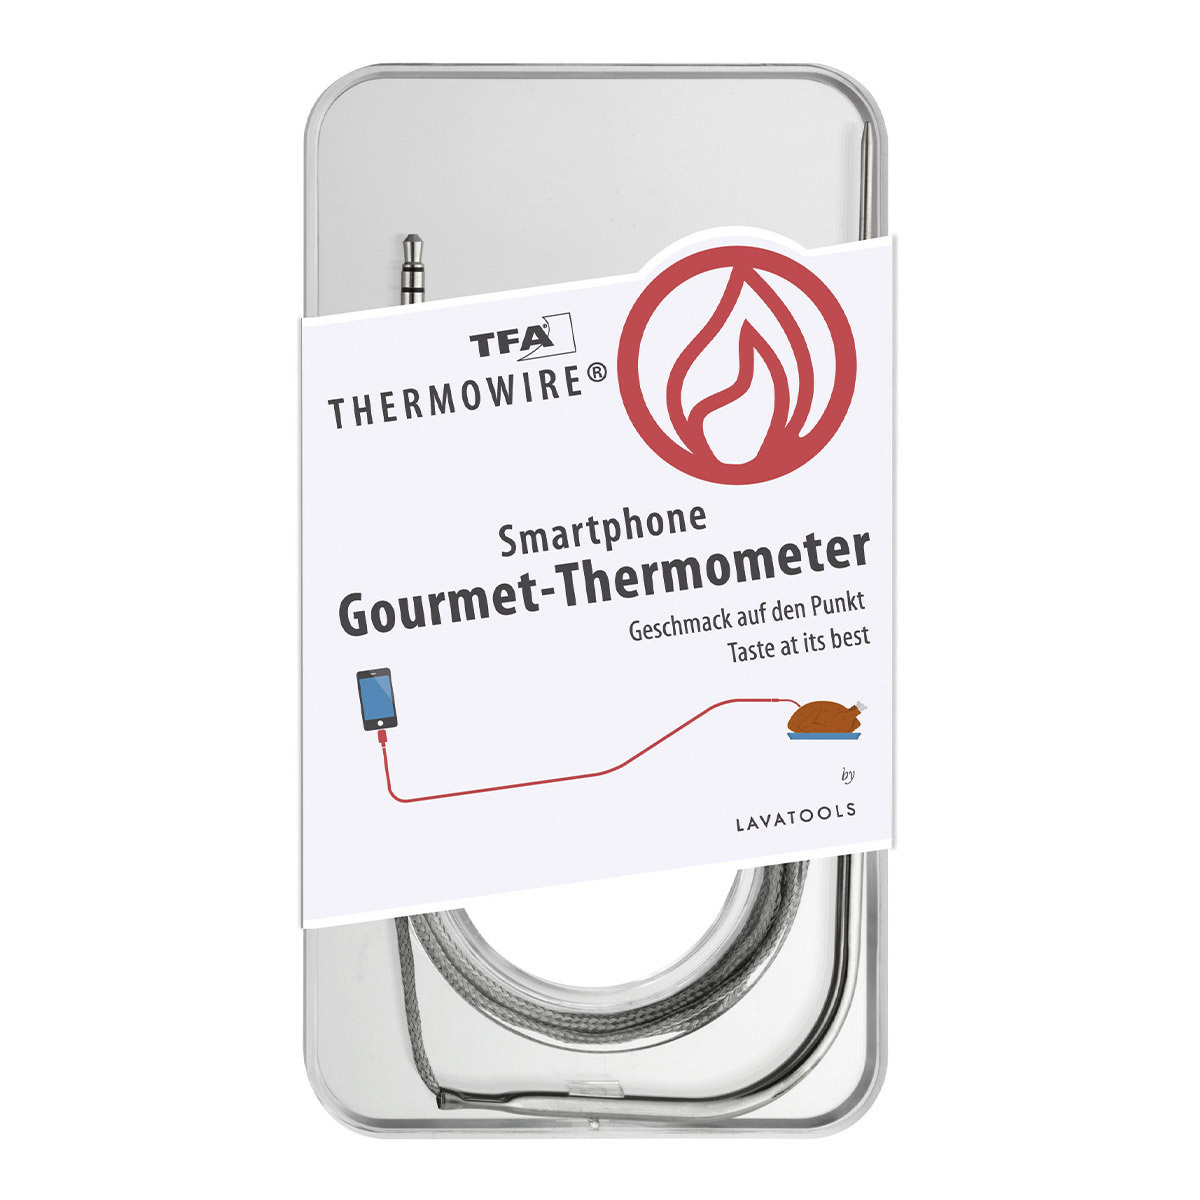 14-1505-01-gourmet-thermometer-für-smartphones-thermowire-verpackung-1200x1200px.jpg